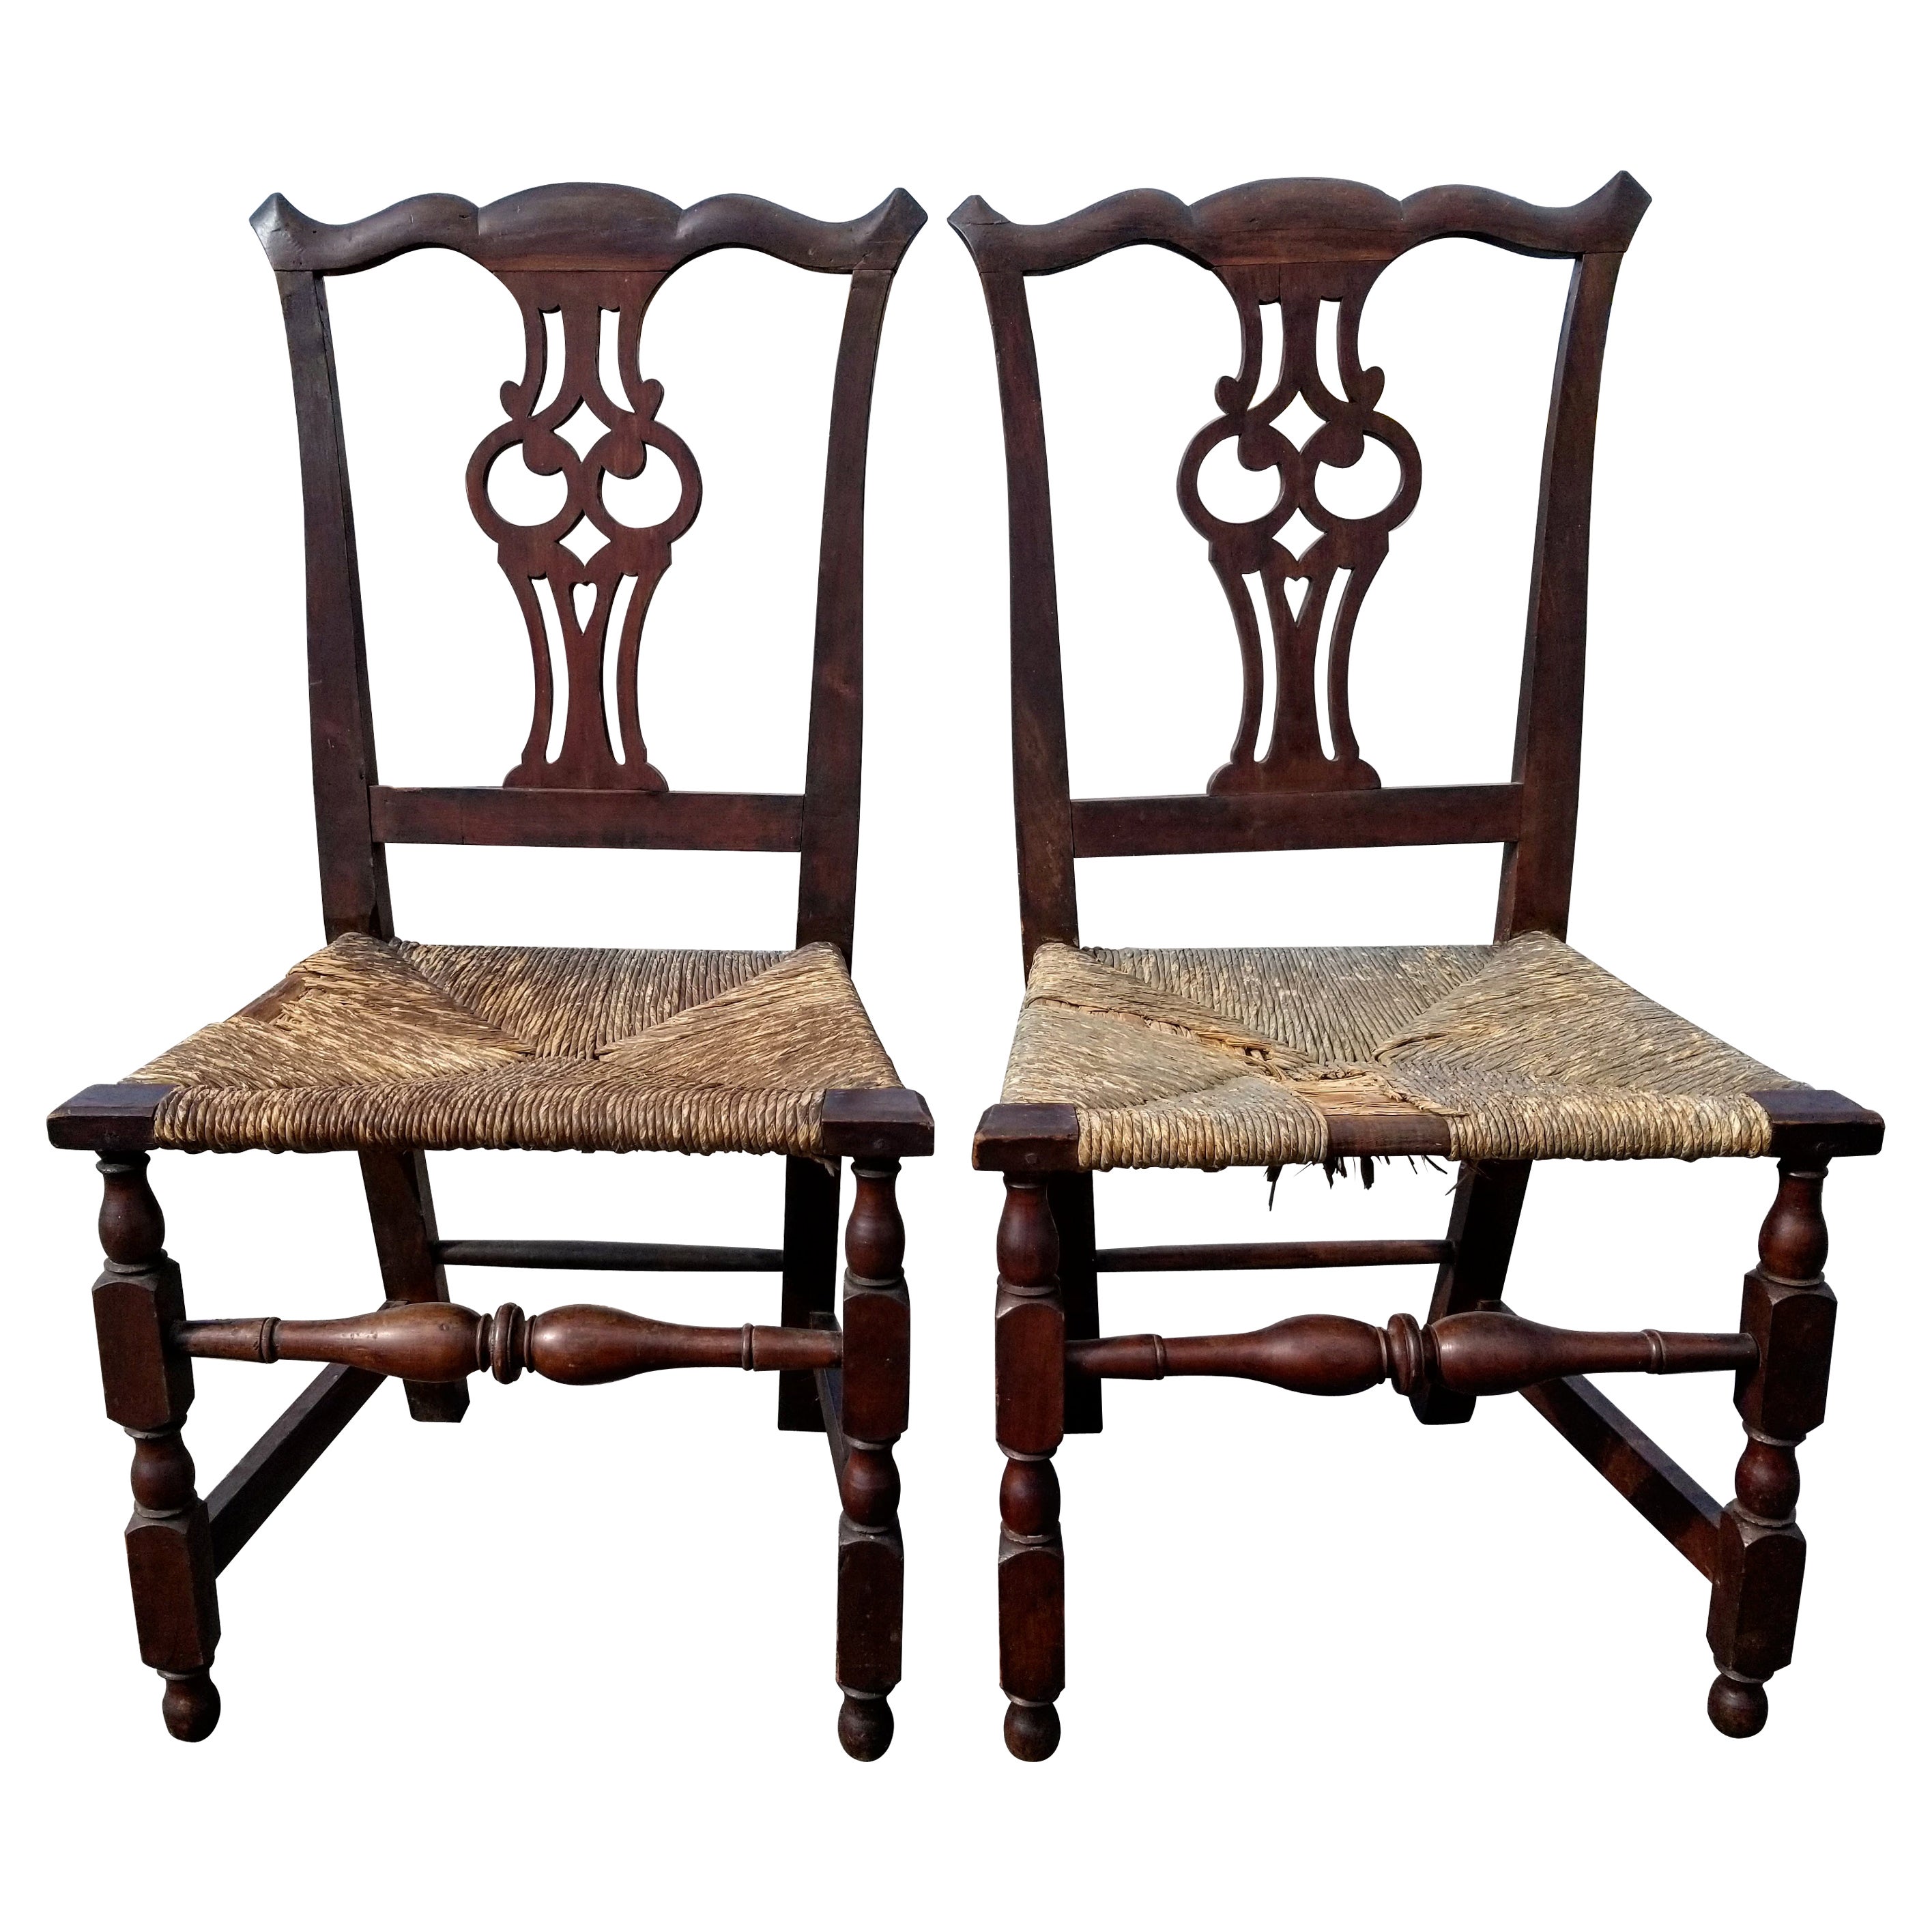 Matched Pair of Chippendale Side Chairs, Massachusetts, Mid 18th Century